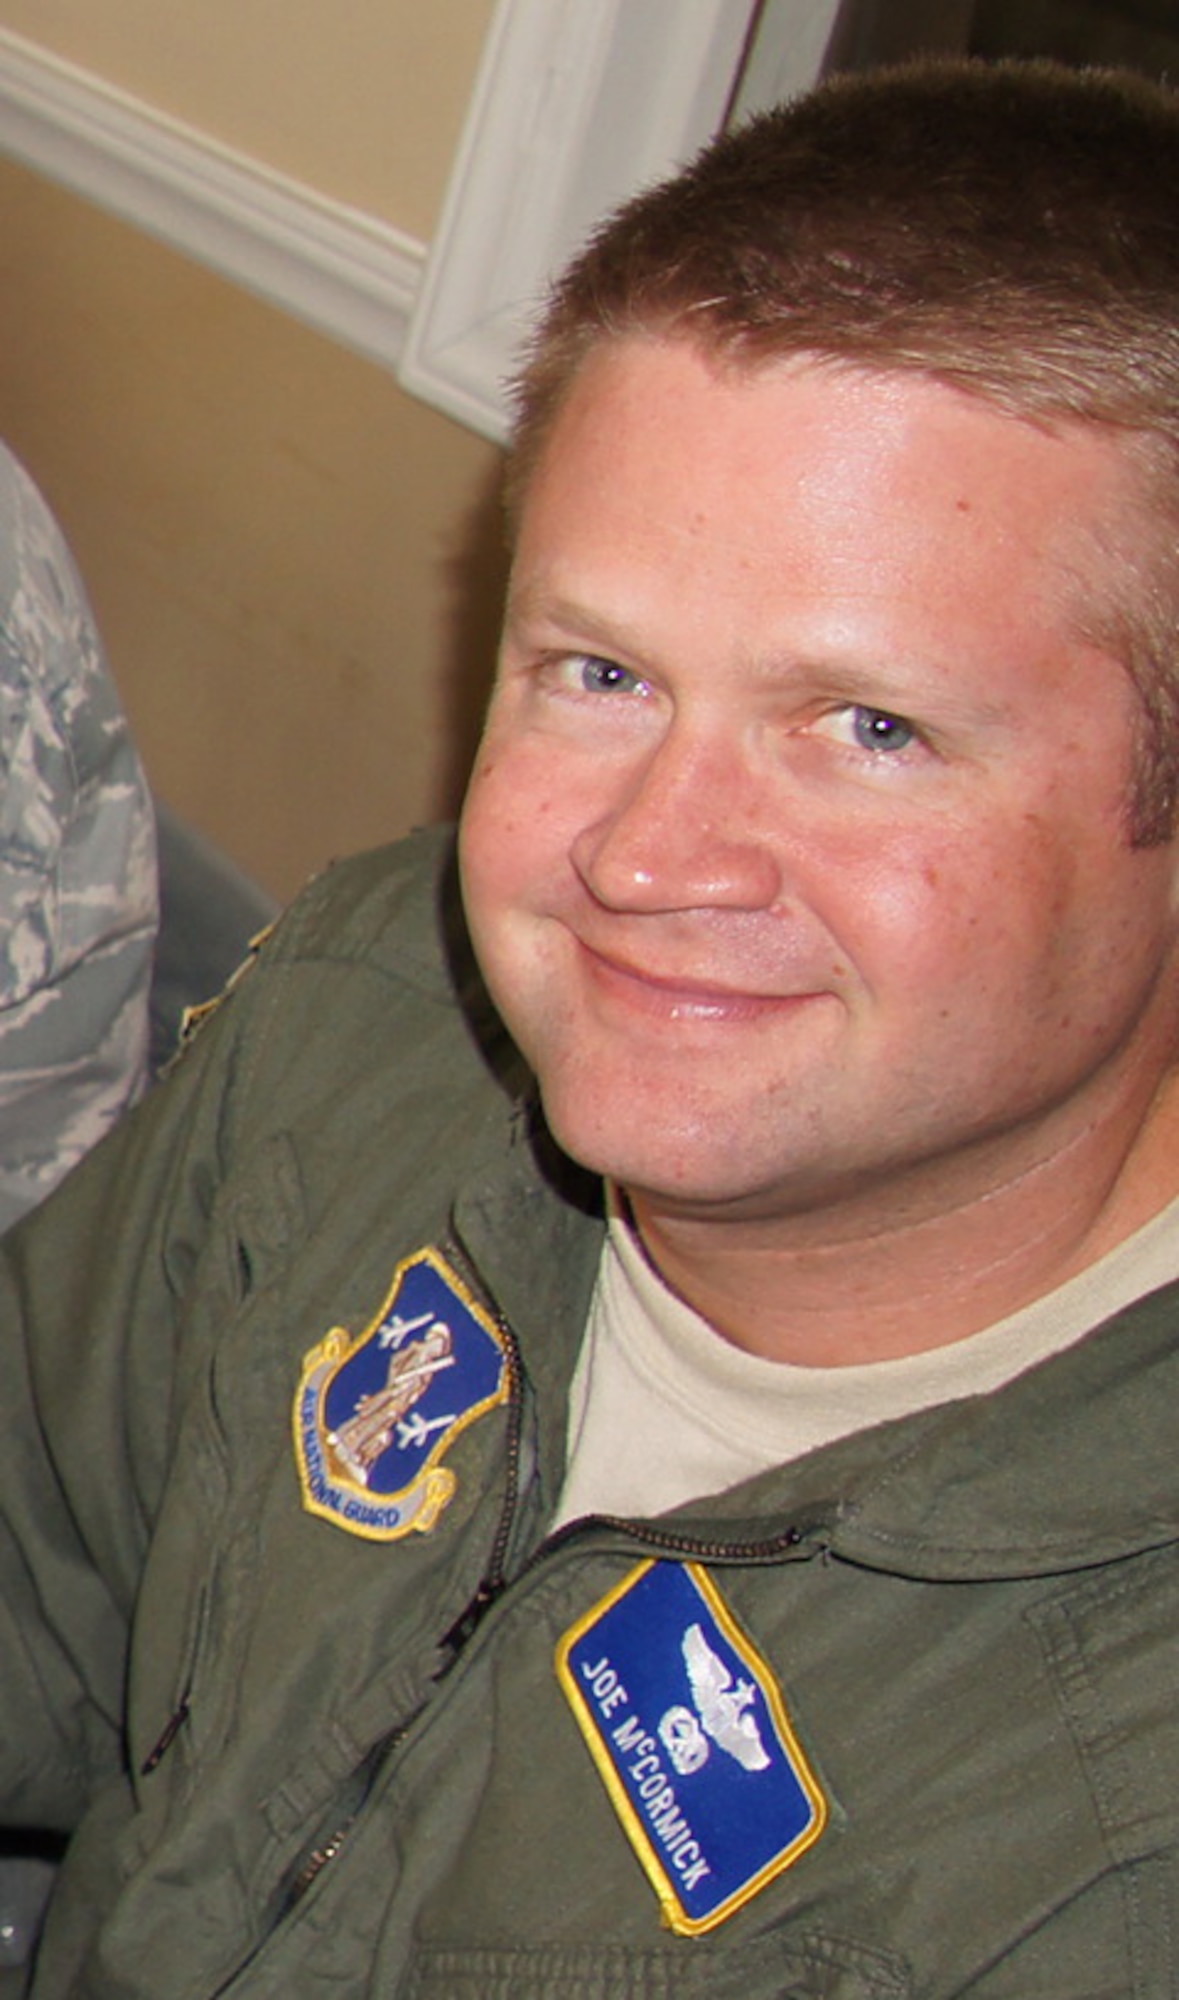 C-130 pilot Major Joseph M. McCormick, one of 4 crew members who were killed July 1, 2012 after their C-130 crashed while fighting wildfires in South Dakota. 
(courtesy photo)
